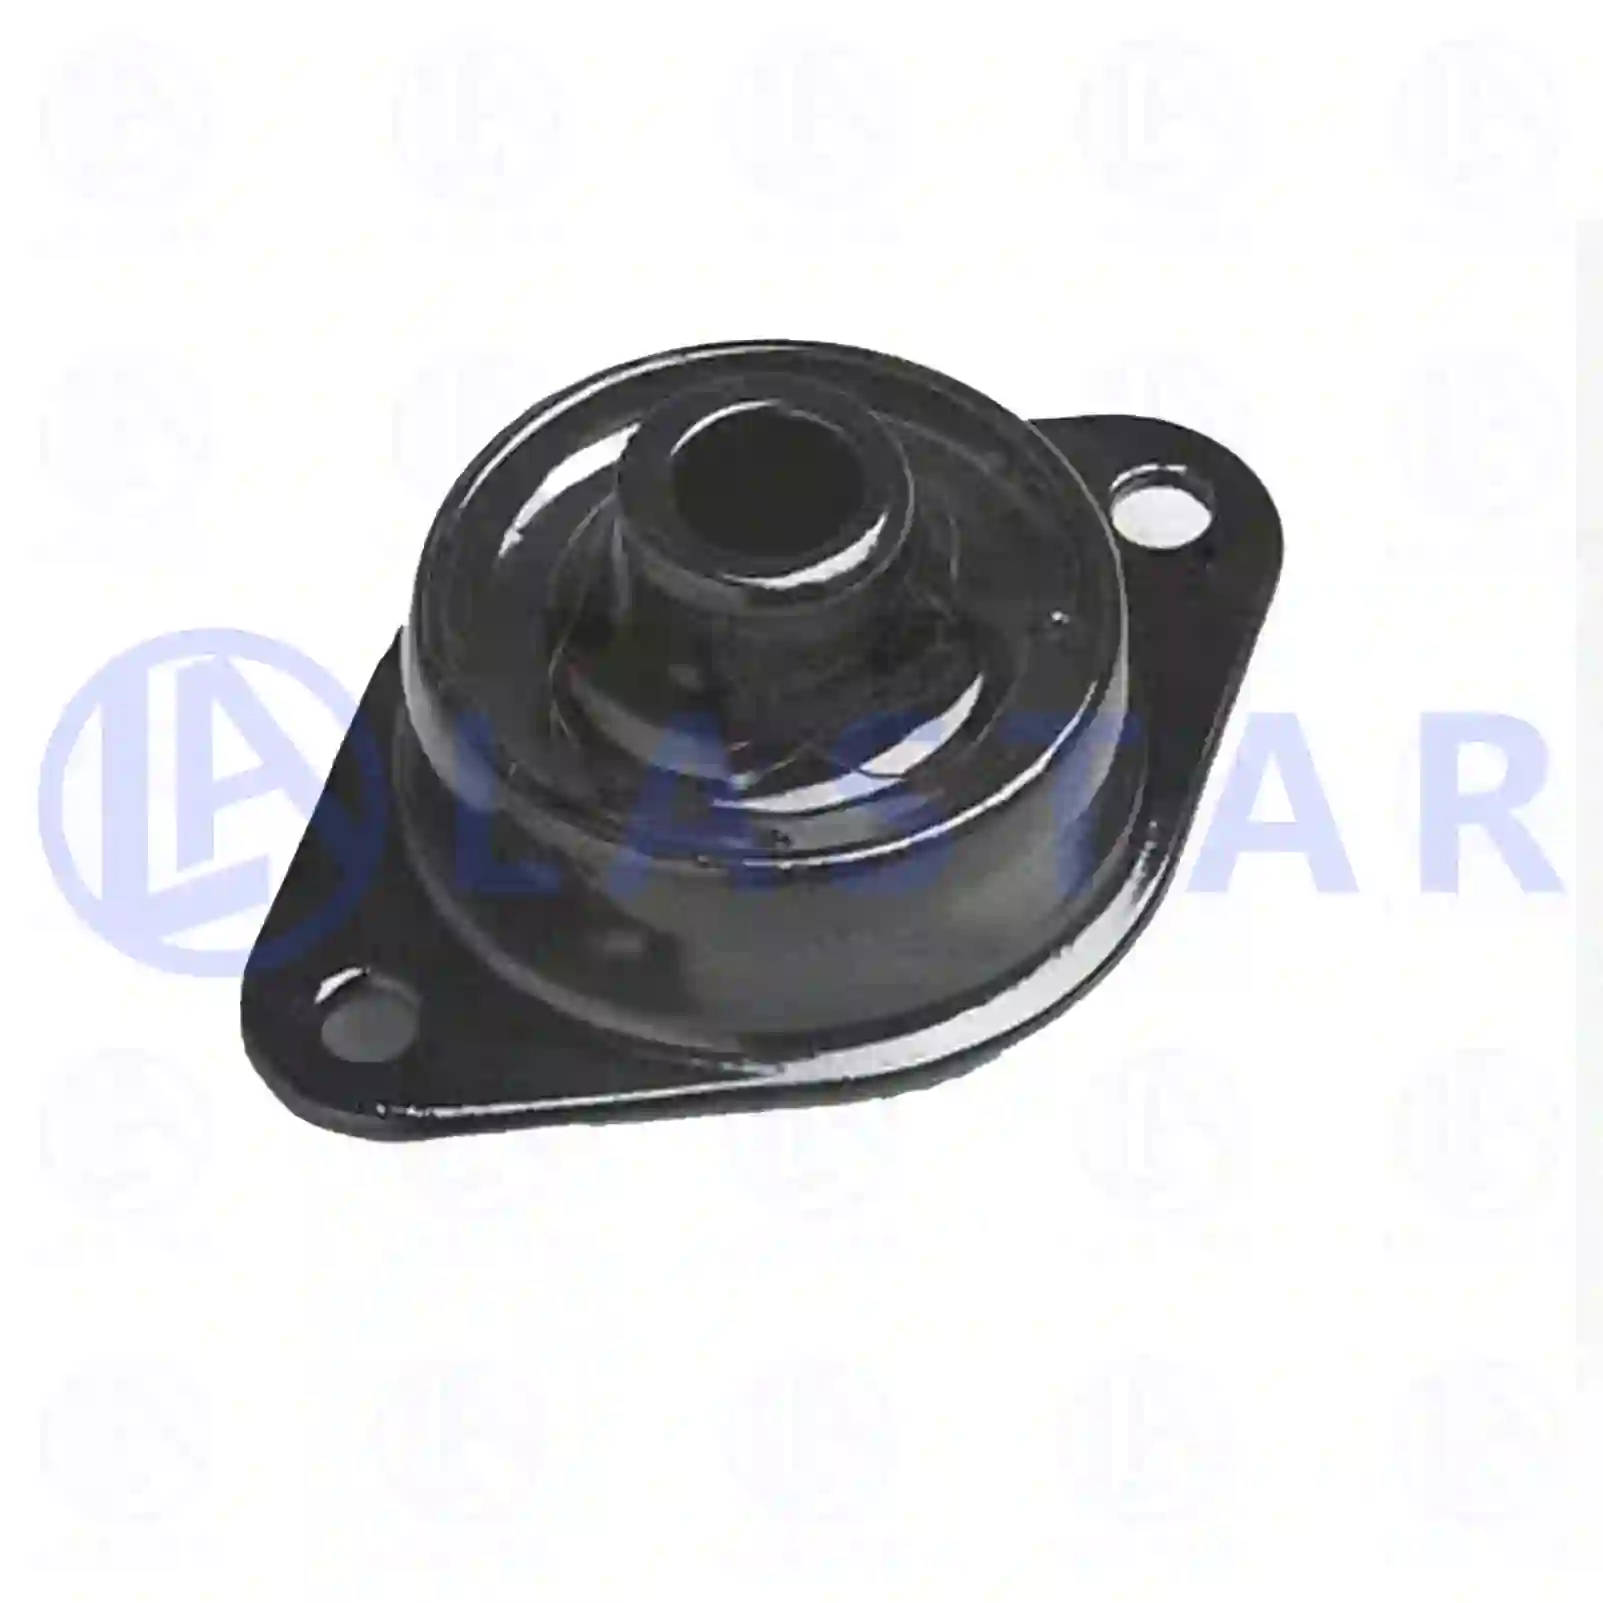 Rubber mounting, 77700054, 319488, ZG40107-0008, , , ||  77700054 Lastar Spare Part | Truck Spare Parts, Auotomotive Spare Parts Rubber mounting, 77700054, 319488, ZG40107-0008, , , ||  77700054 Lastar Spare Part | Truck Spare Parts, Auotomotive Spare Parts